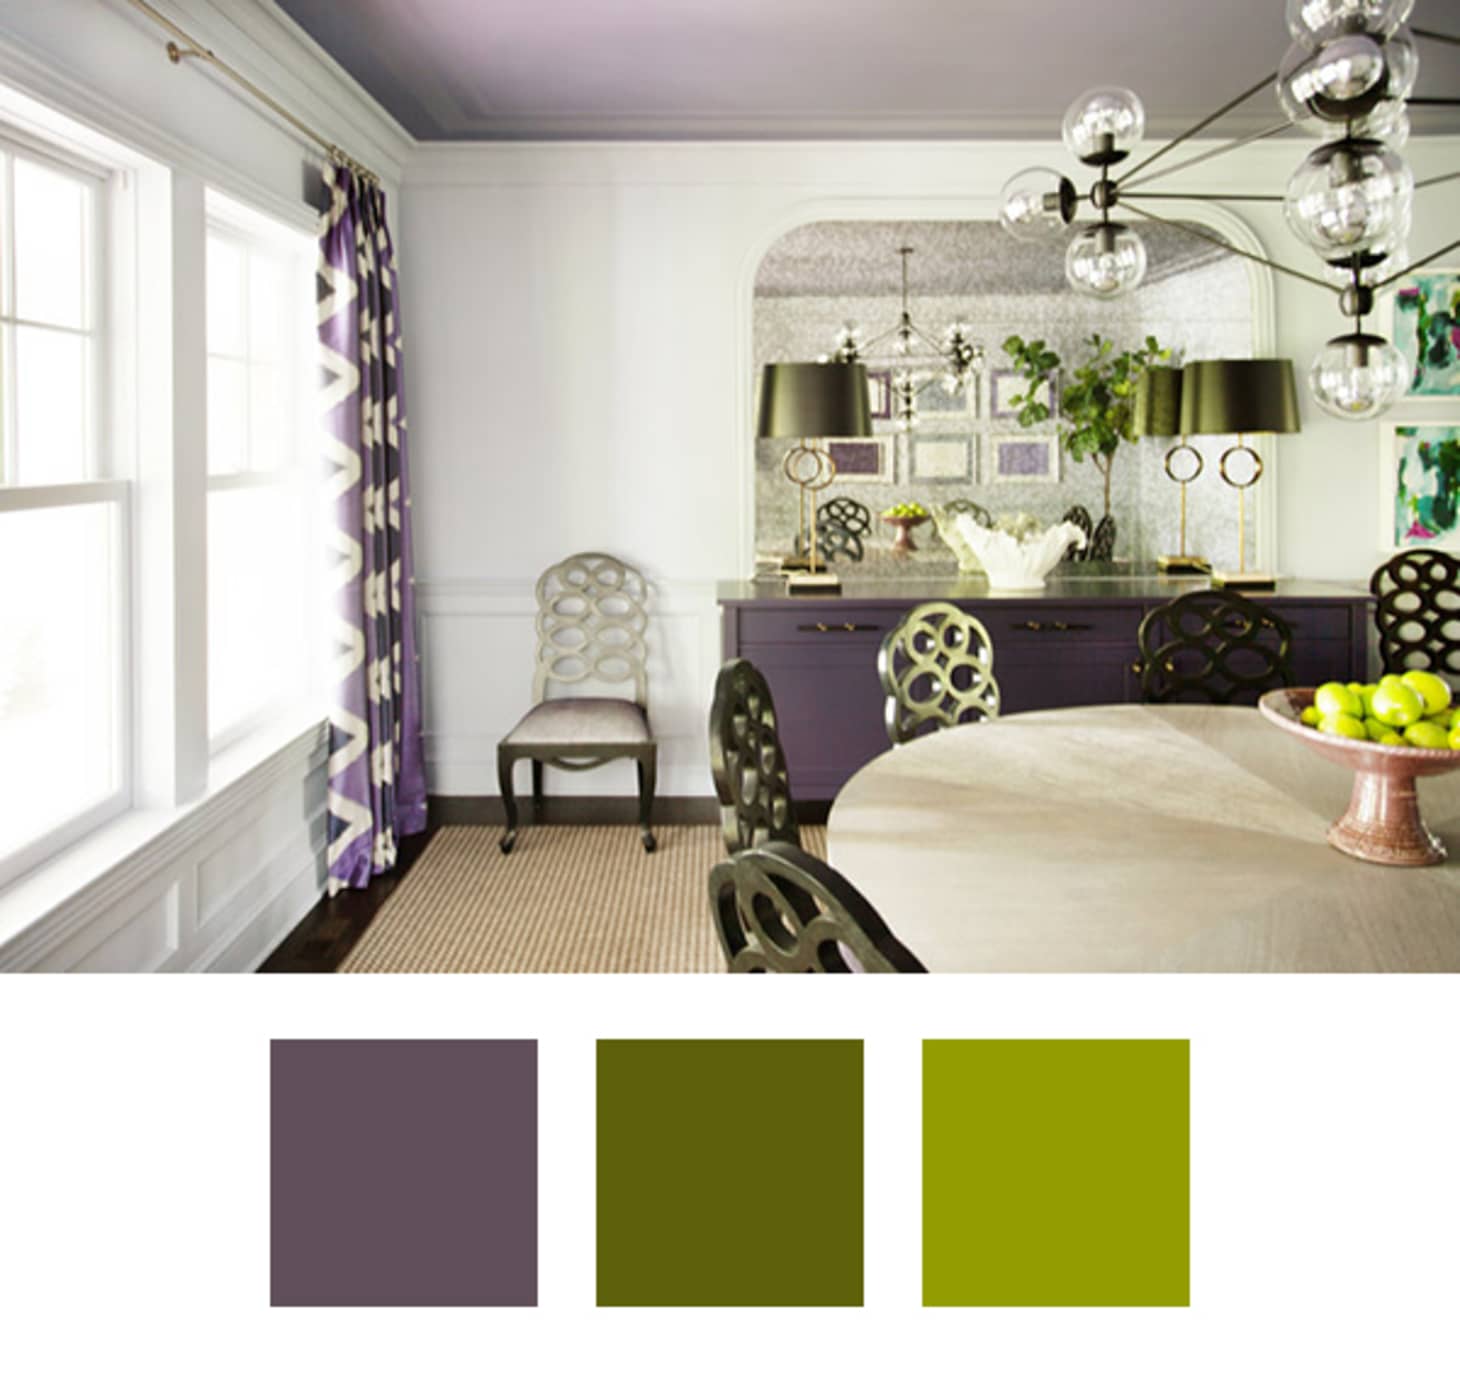 Decorating Ideas 6 Colors To Pair With Purple At Home